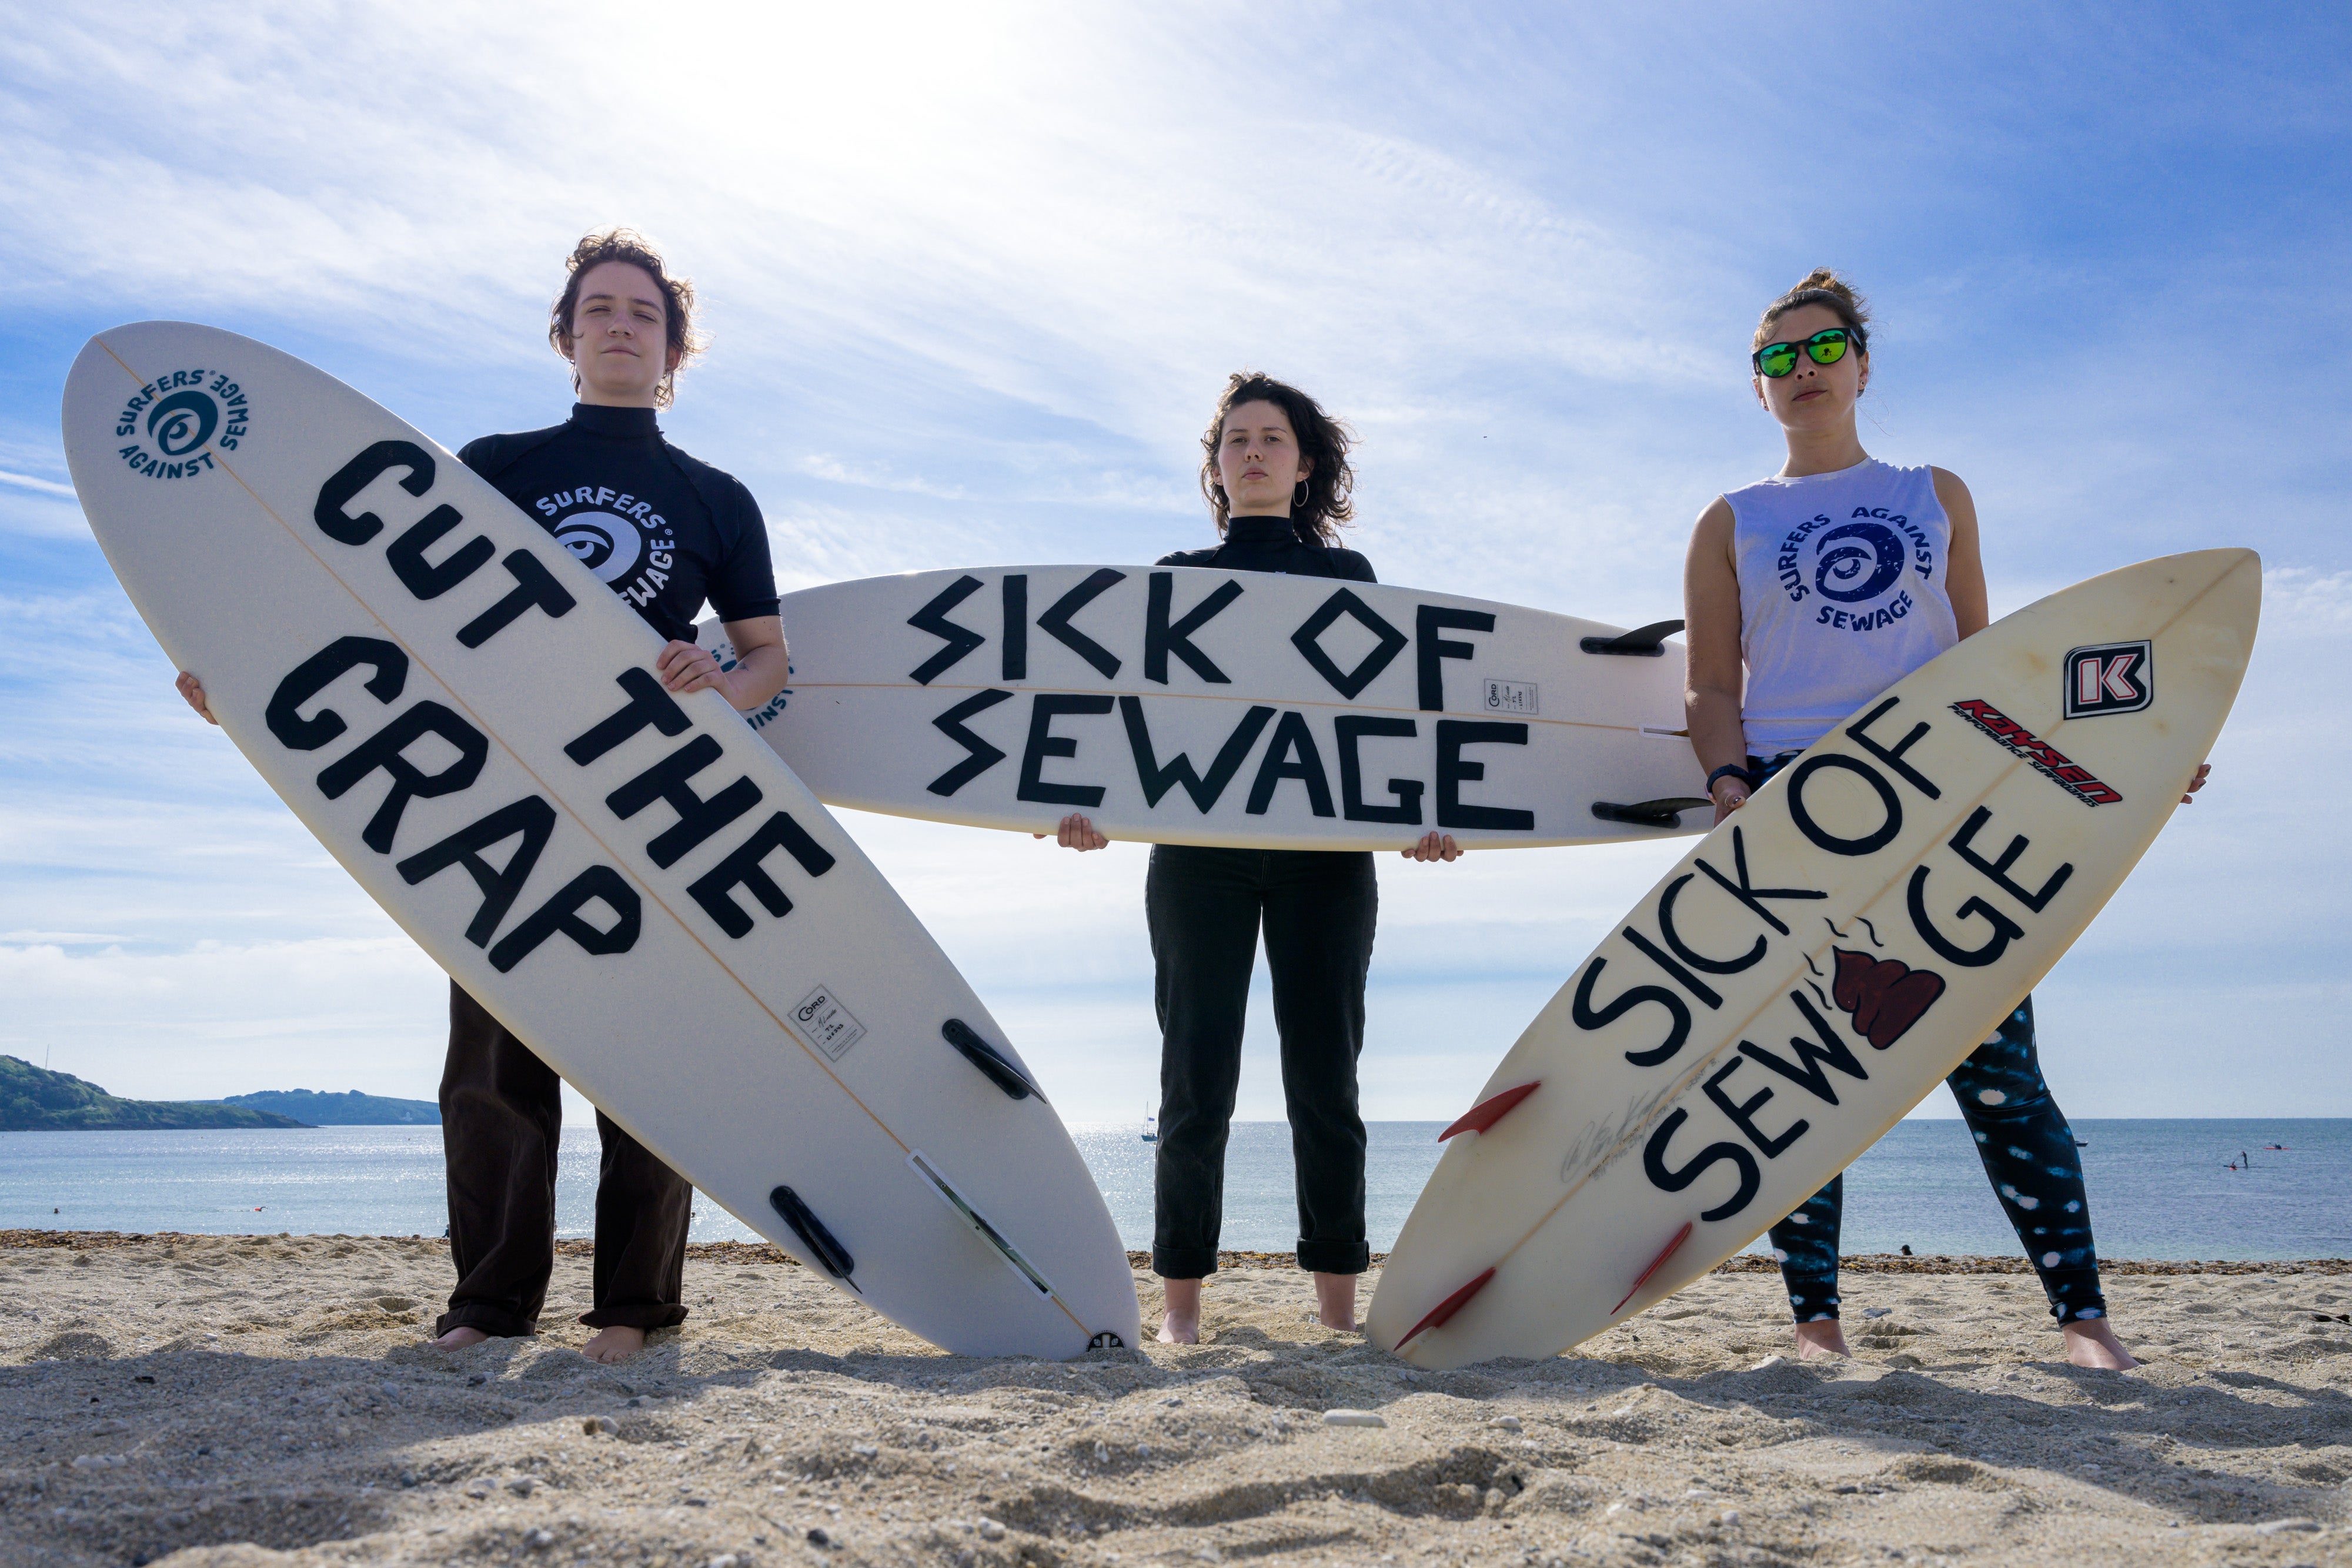 Protest by Surfers Against Sewage in Falmouth